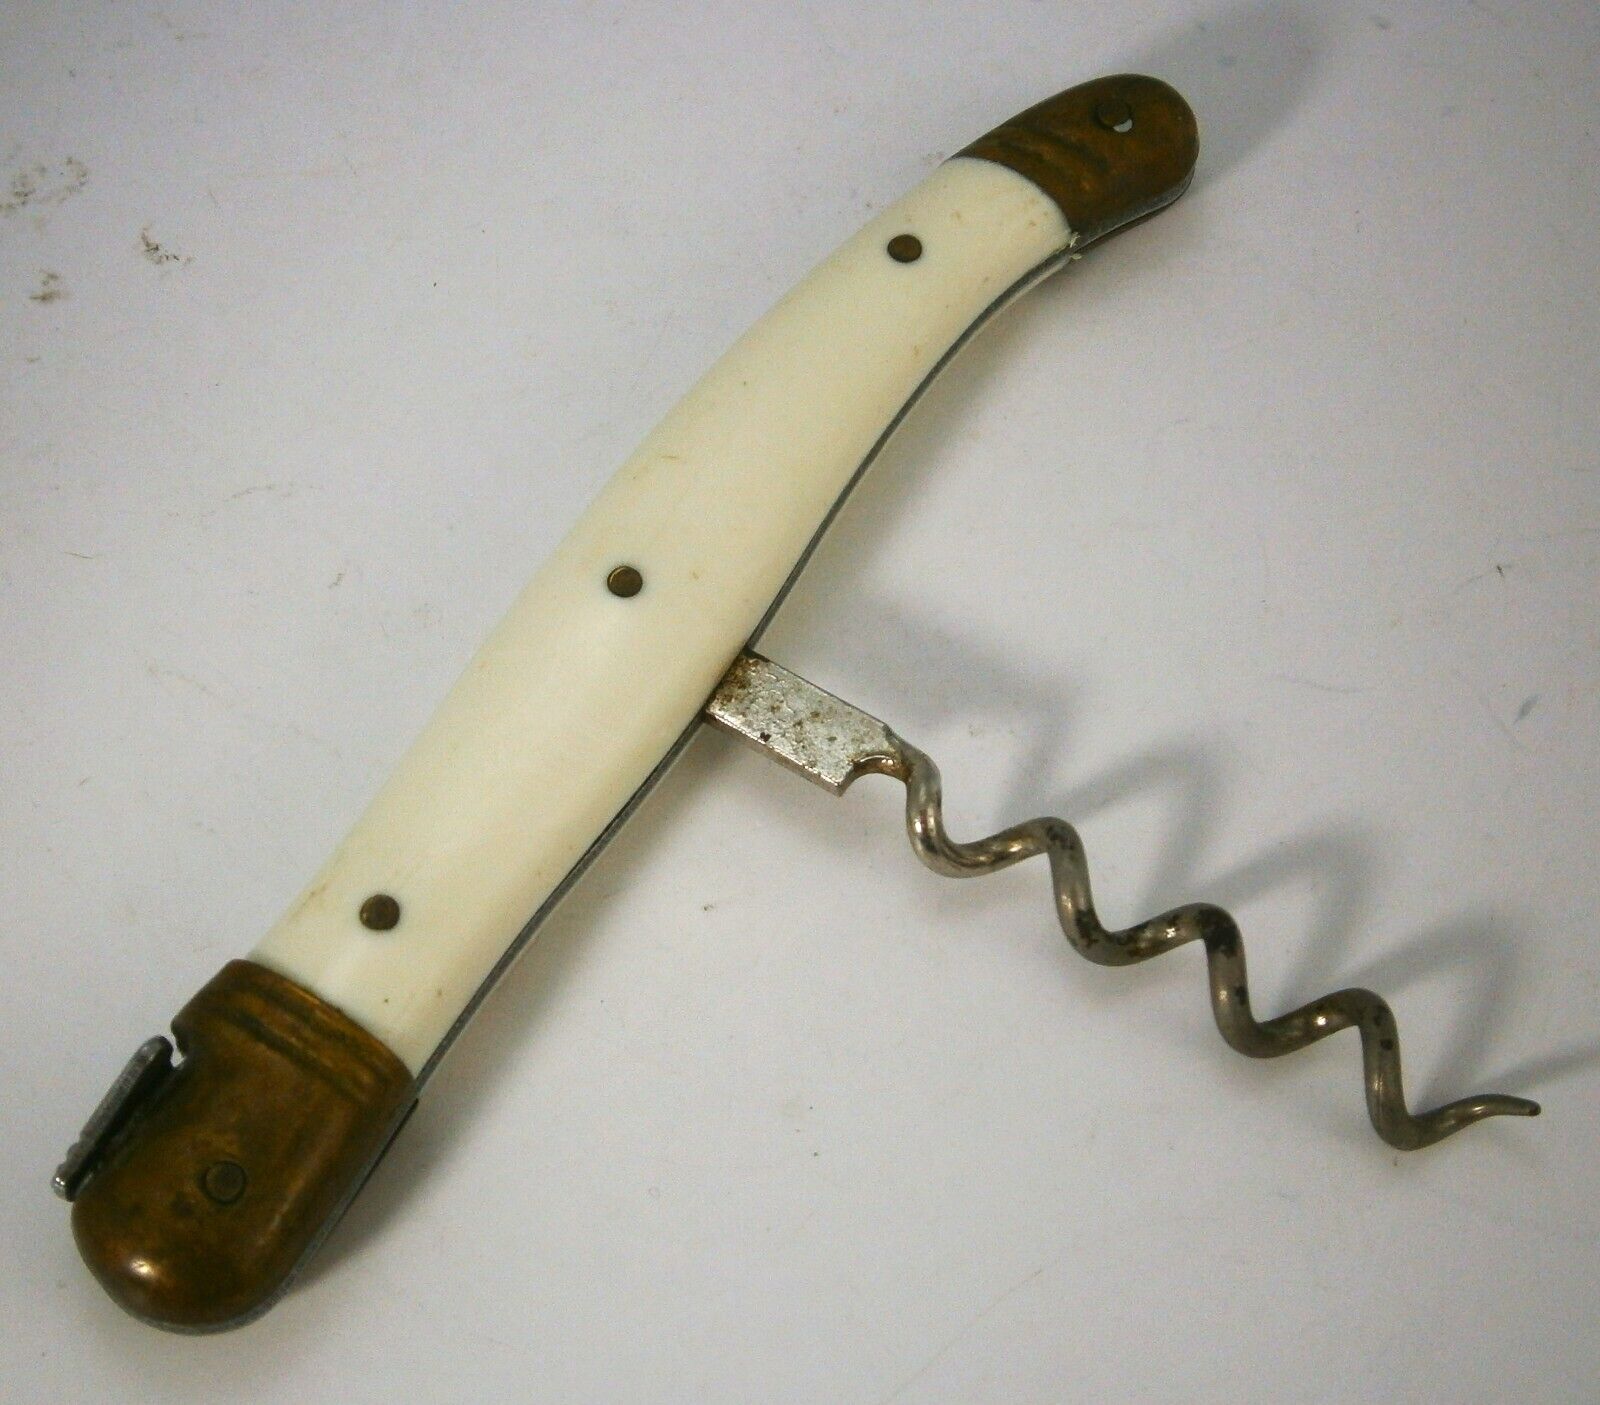 Unusual Old Corkscrew with Knife Style Handle and Fly Wire Puller